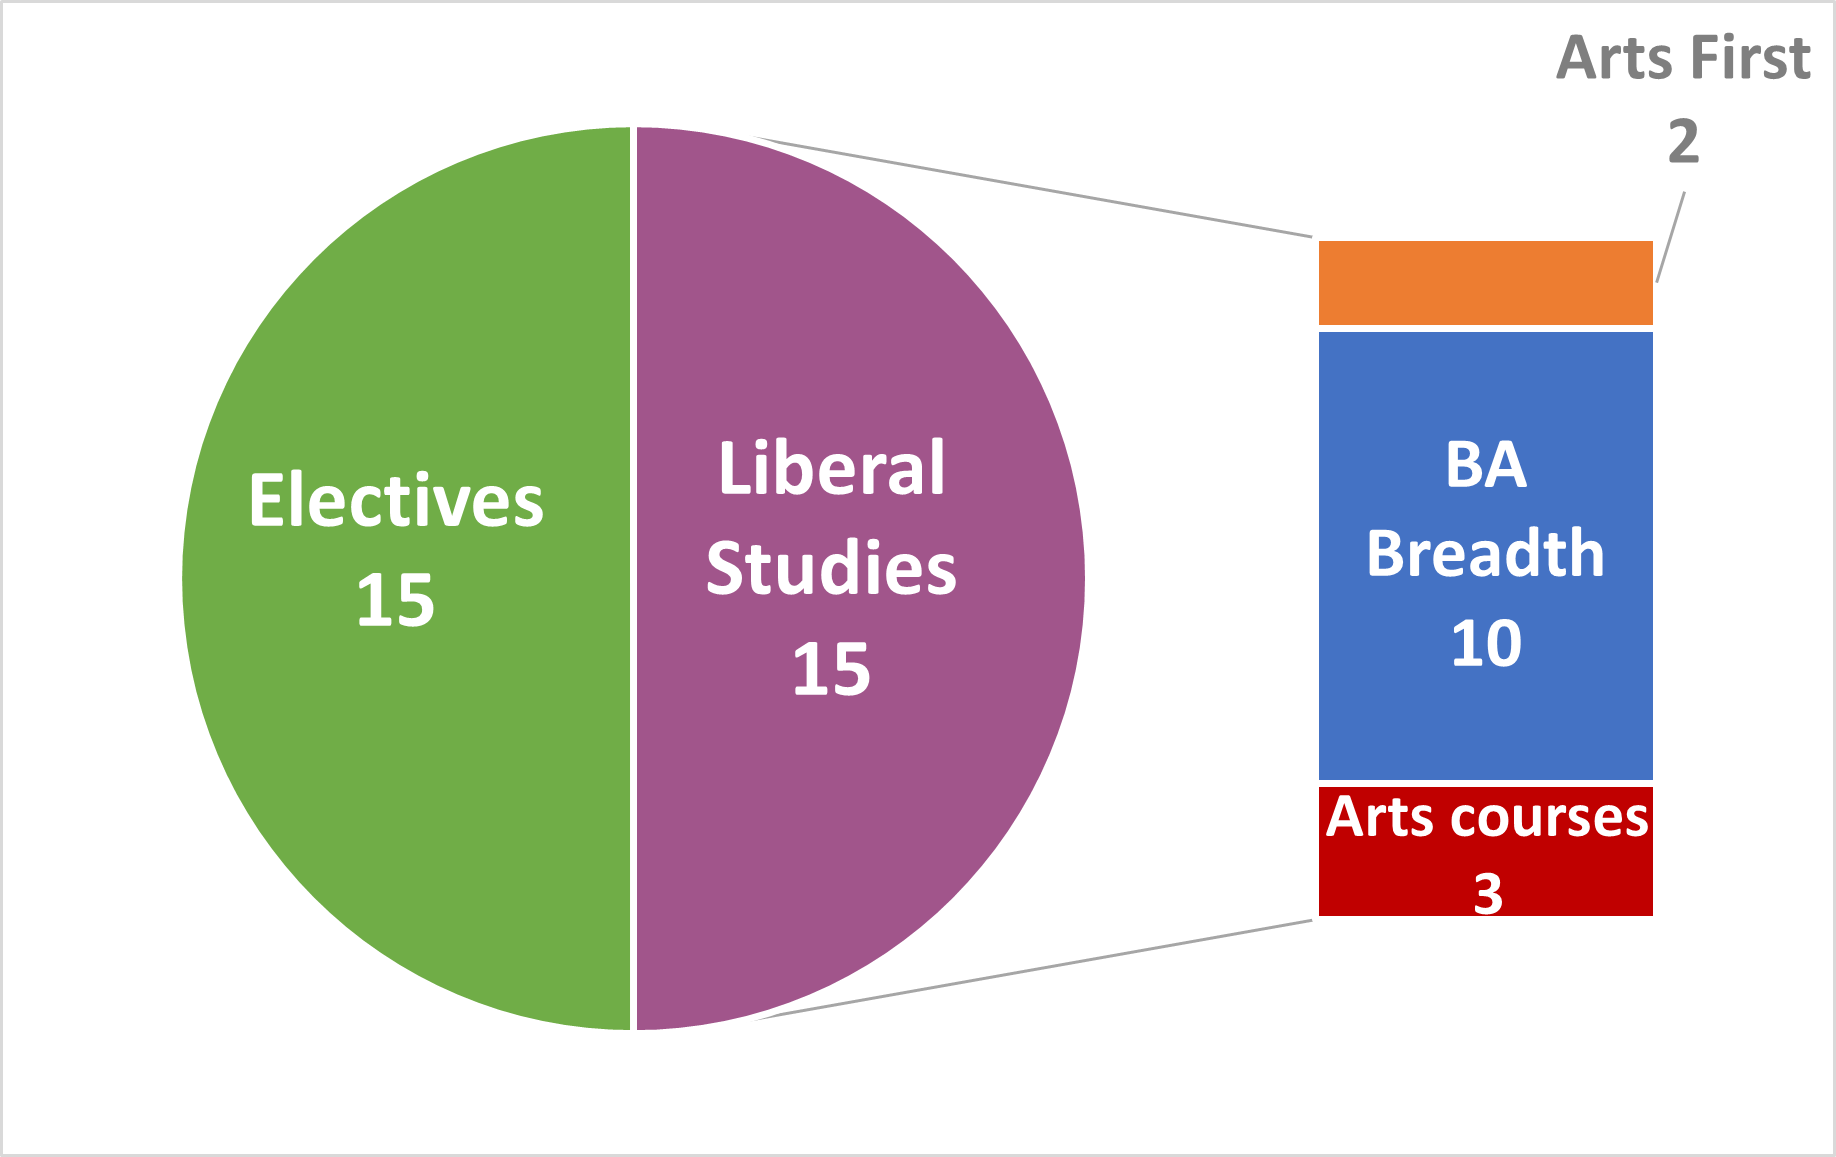 Pie graph displaying the components of a three-year general BA degree in liberal studies: 15 electives and 15 liberal studies courses made up of 2 Arts First courses, 10 BA Breadth courses, and 3 unrestricted Arts courses.